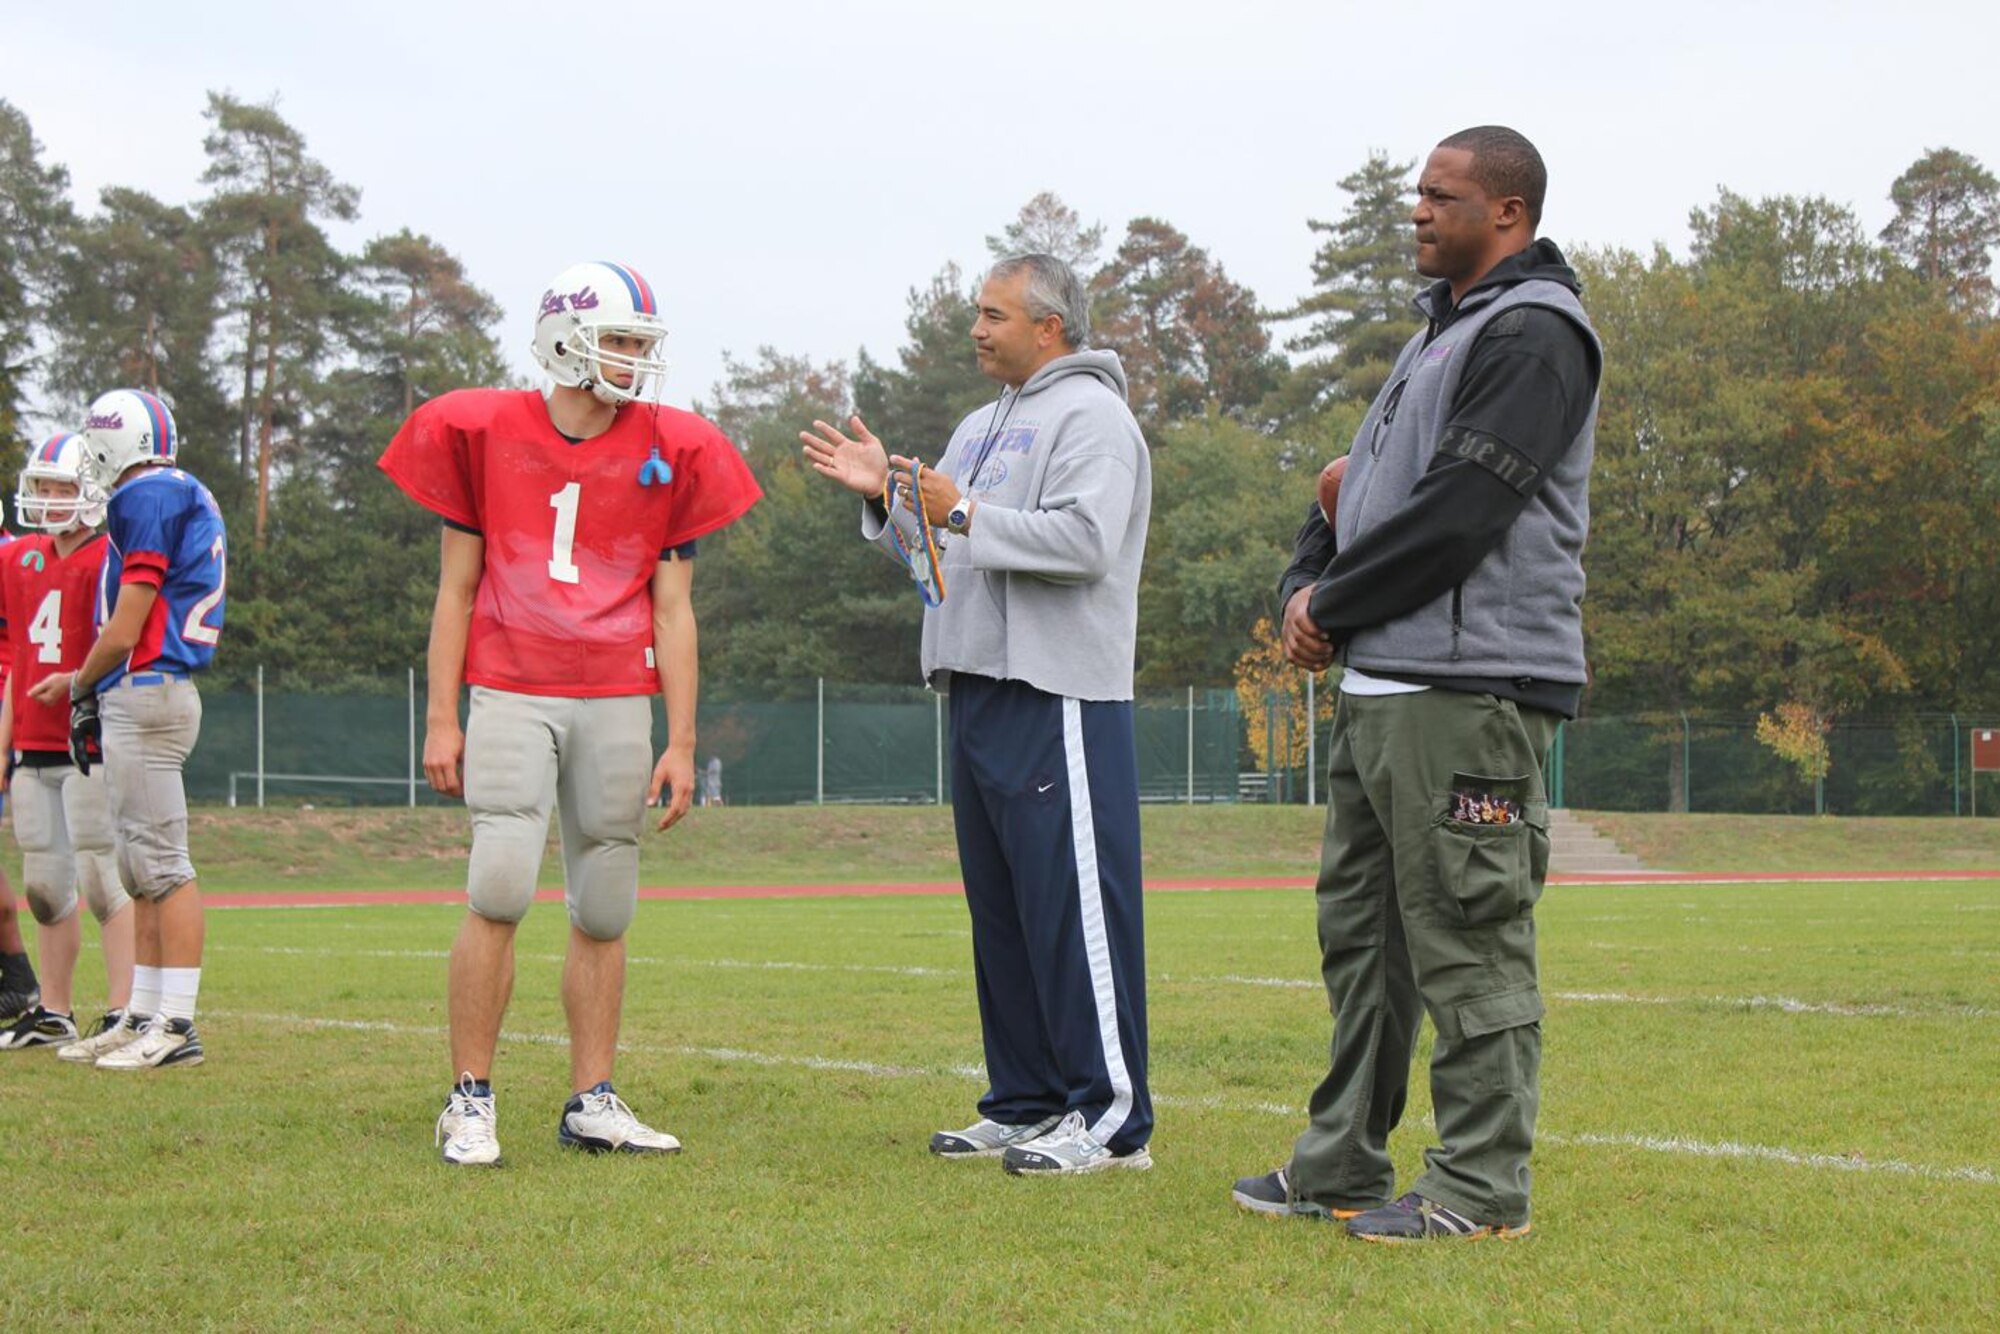 Derrick Mayes, a member of the 1996 Super Bowl championship team the Green Bay Packers and one of the university of Notre Dame's all-time leading receivers, watches Steven Groenheim receive instructions from Coach Carlos Amponin Oct. 7 at Ramstein High School.  My Mayes, who represents the National Collegiate Scouting Association, was at the school to speak with students and parents on dispelling the myths and misconceptions of the college recruiting process. 